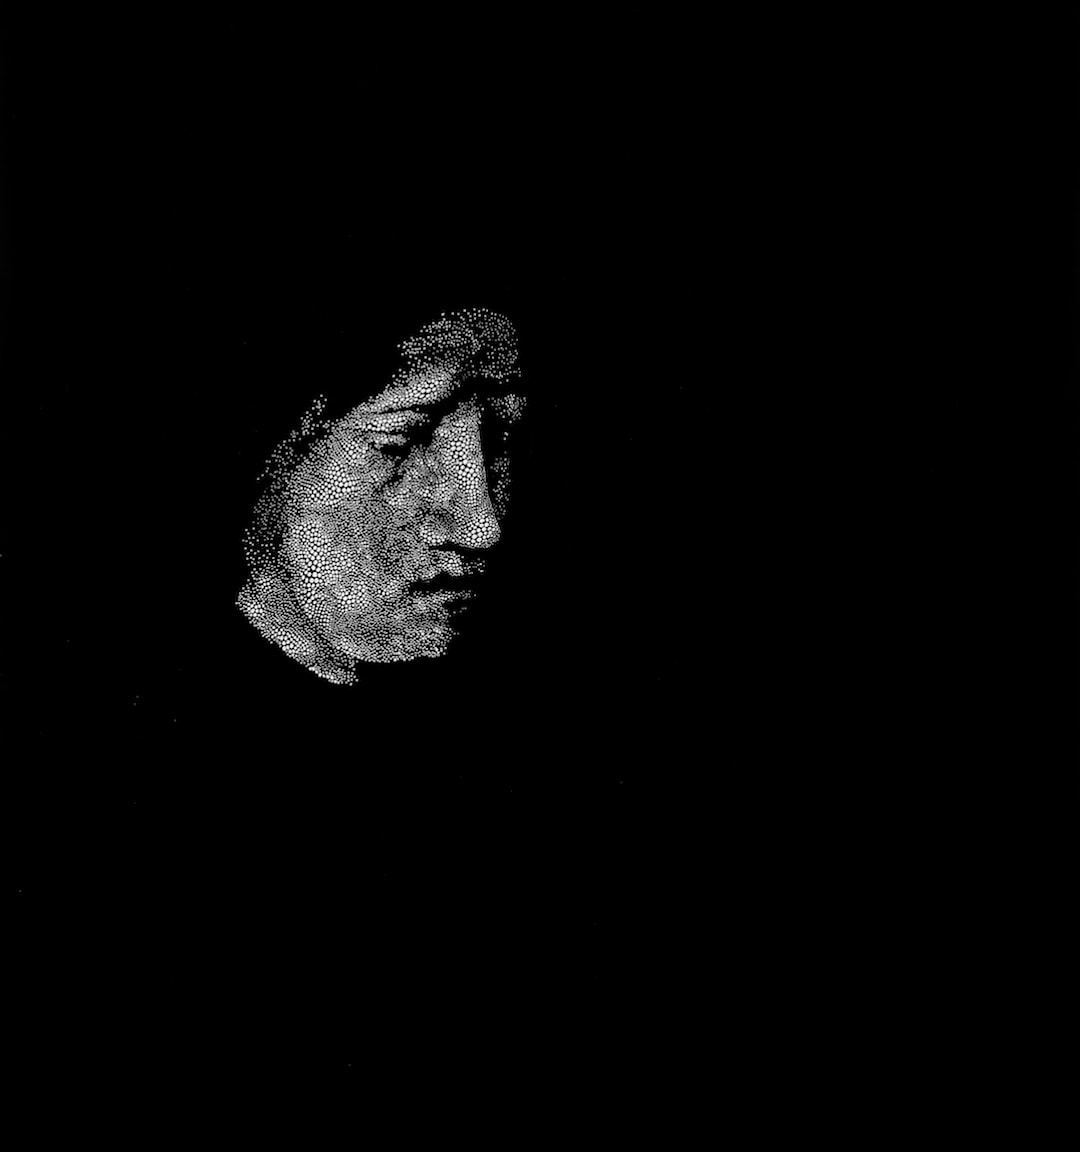 Sebastiaan Bremer Saskia black and white image of Old Masters style portrait of man's head painted with dots emerging from black background